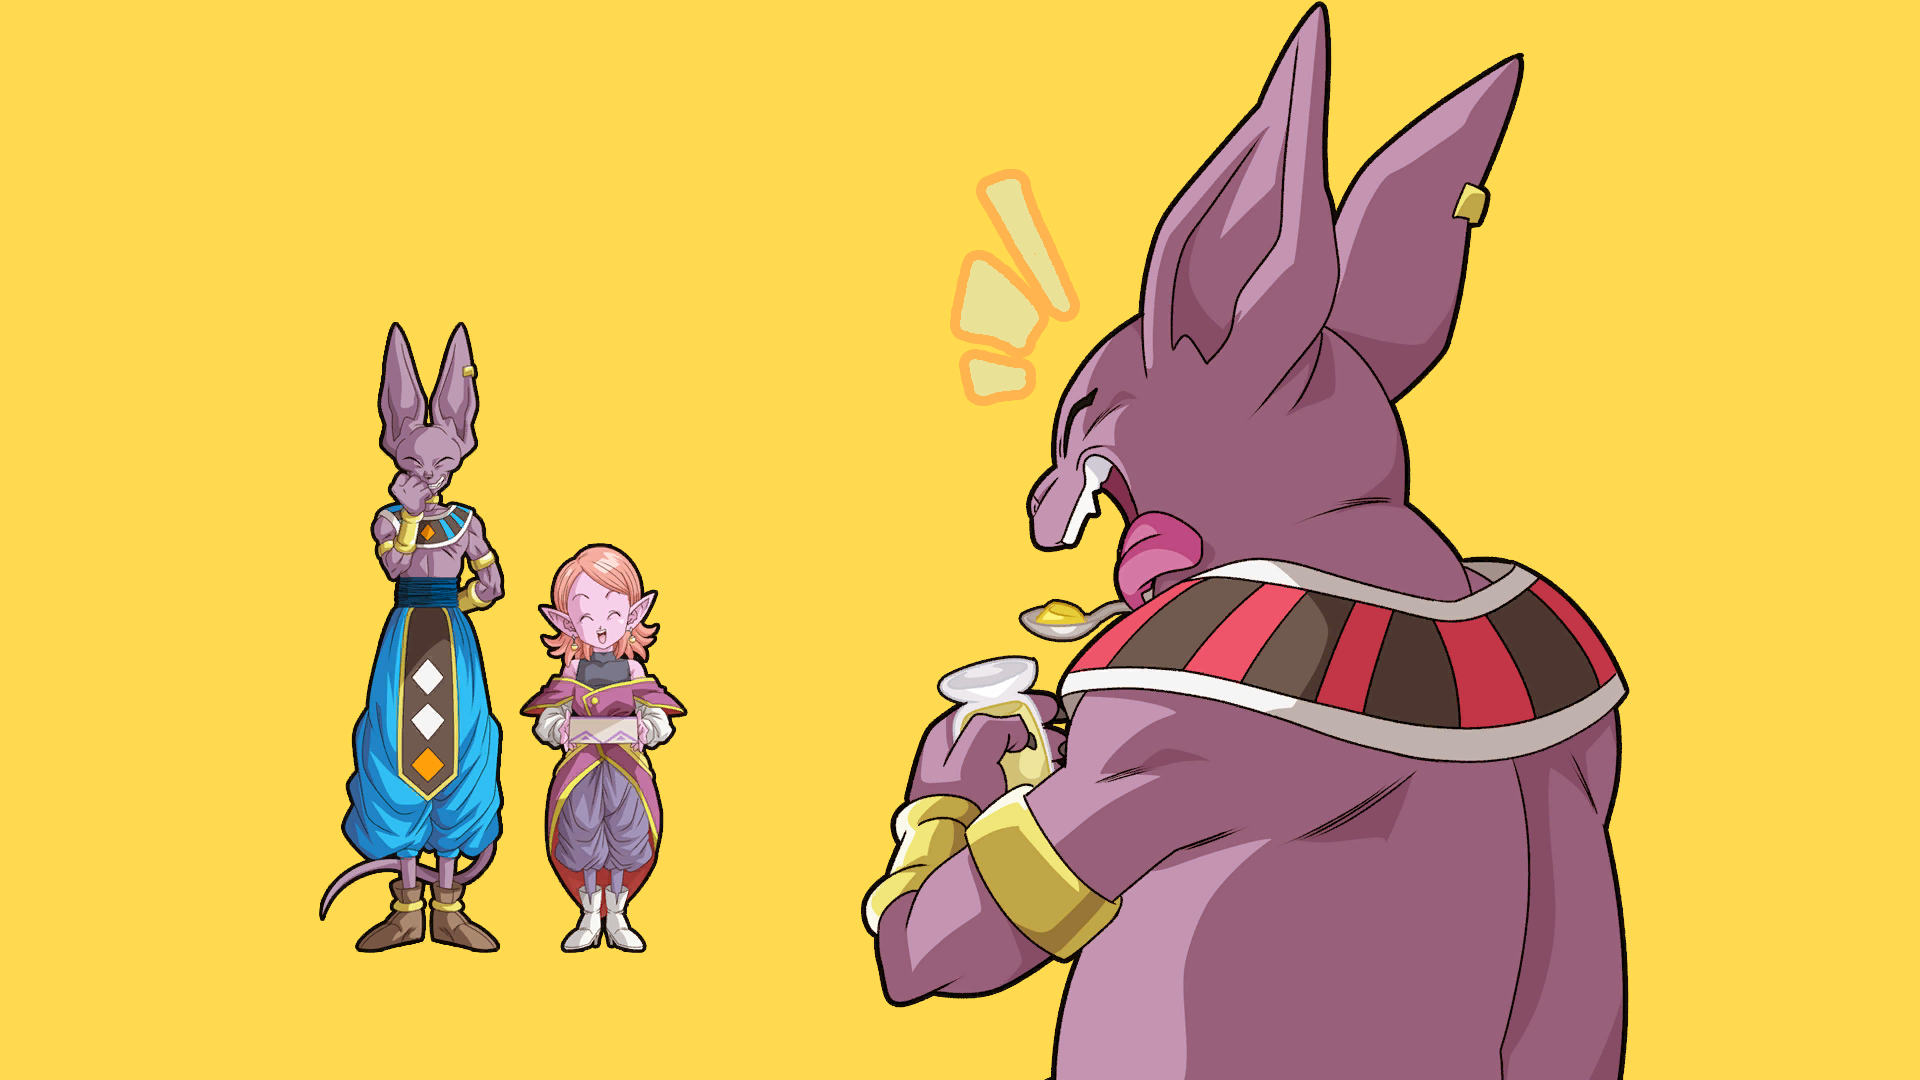 Anime 1920x1080 Dragon Ball Xenoverse 2 Champa Beerus Chronoa anime girls anime creatures yellow background simple background minimalism tongue out Dragon Ball Super